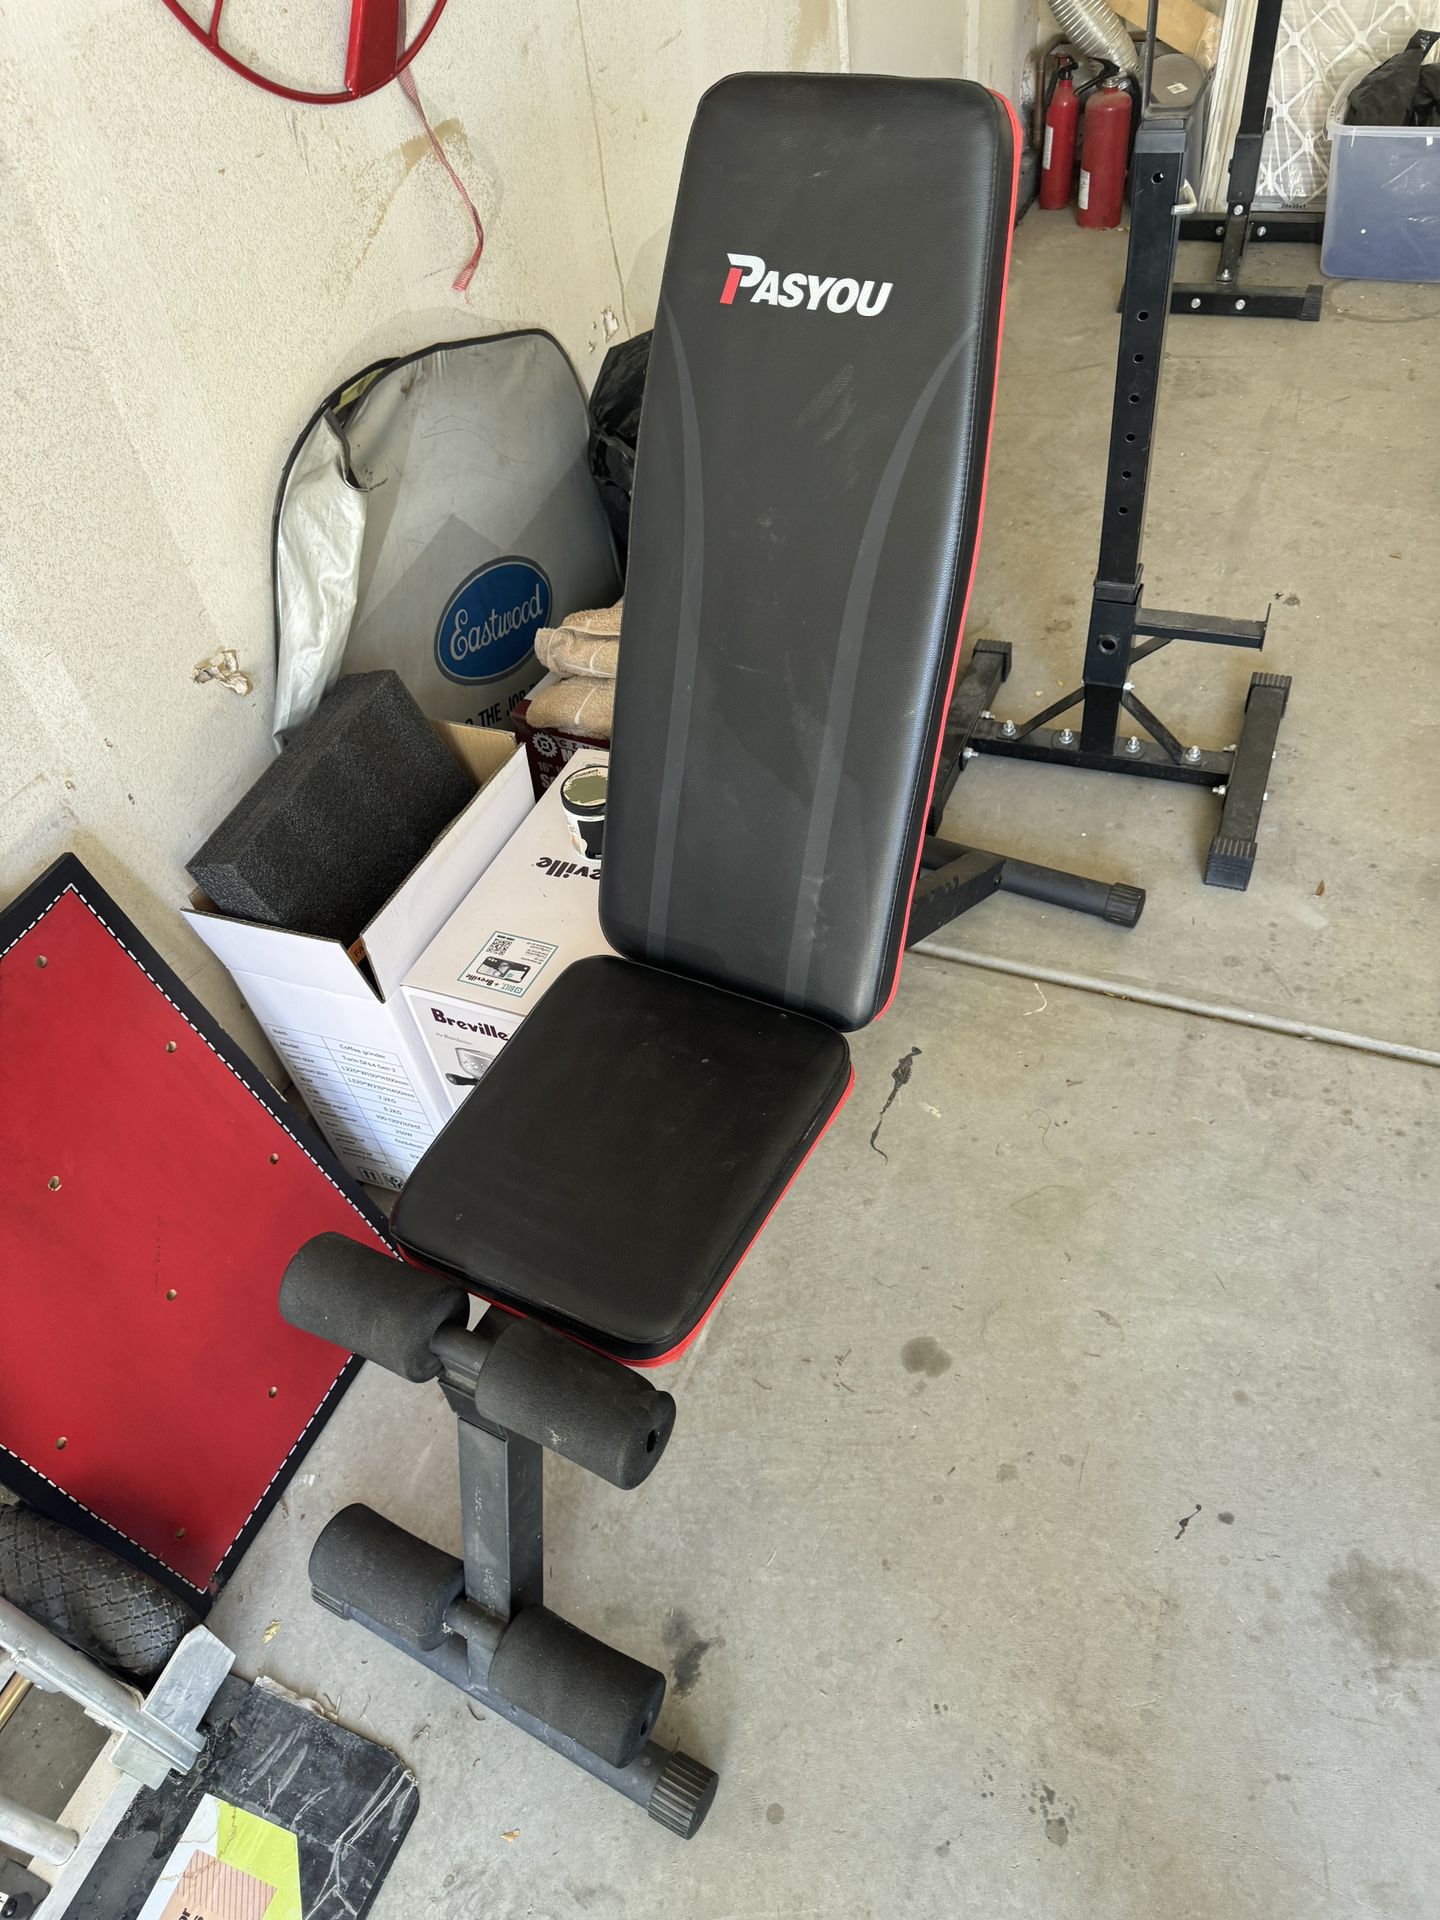 Workout Bench And Barbel Holders Basically New 